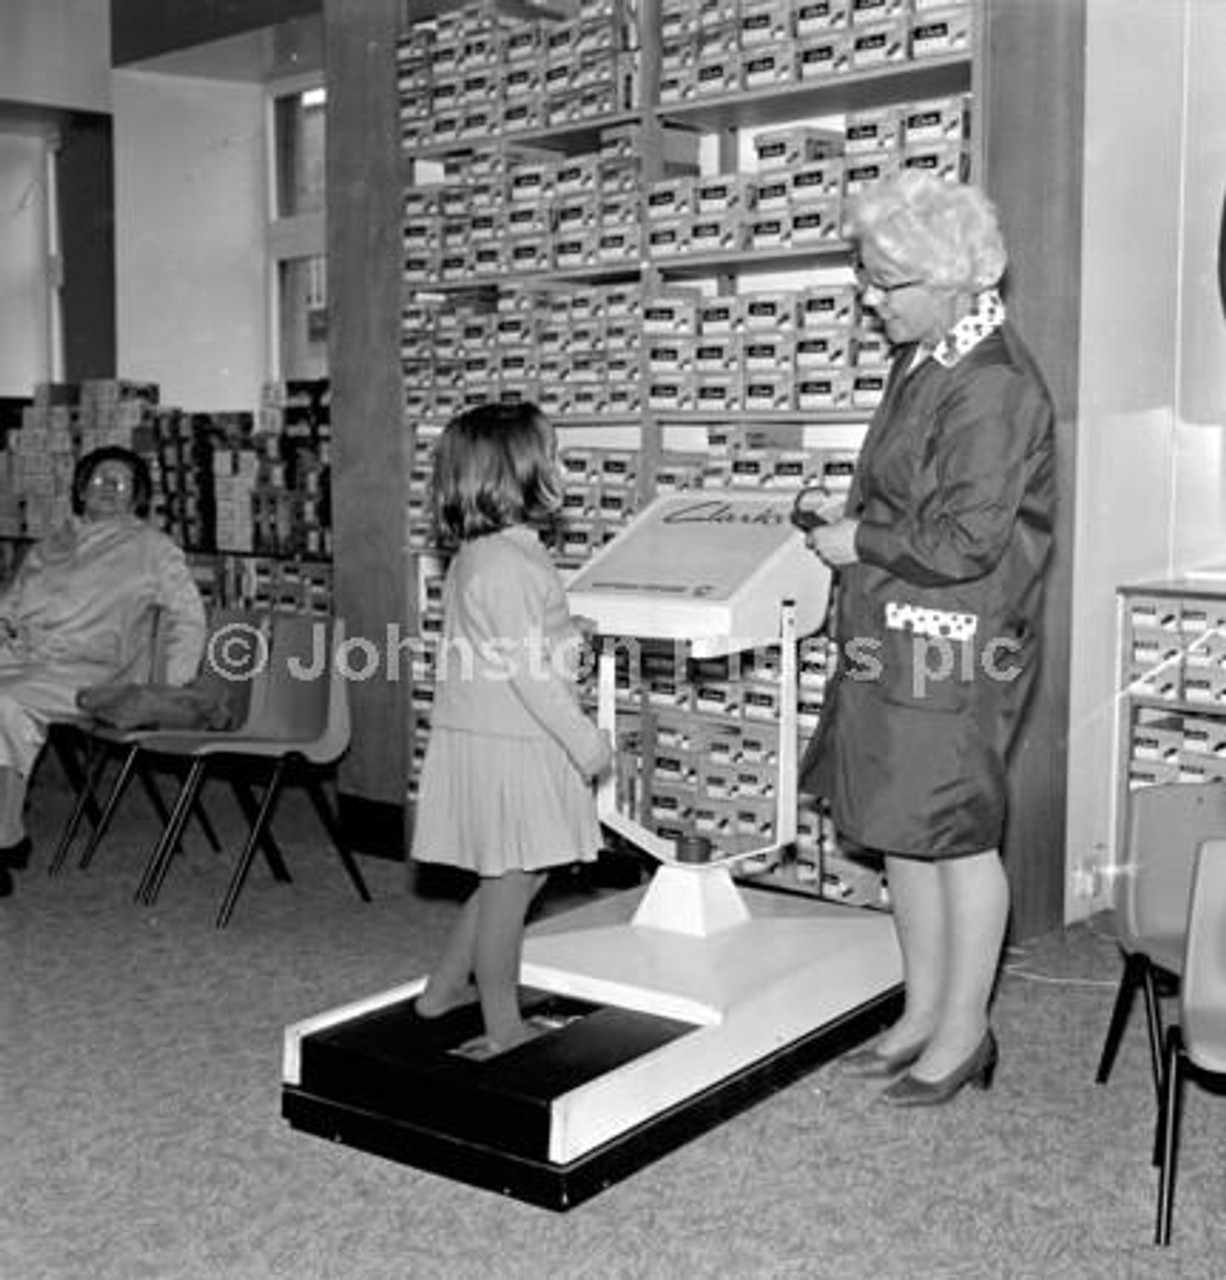 20235779-Little girl has her shoe checked on a Clarks fitting machine at Starks shoe shop in South Bridge Edinburgh, May 1971. - National World | Newsprints